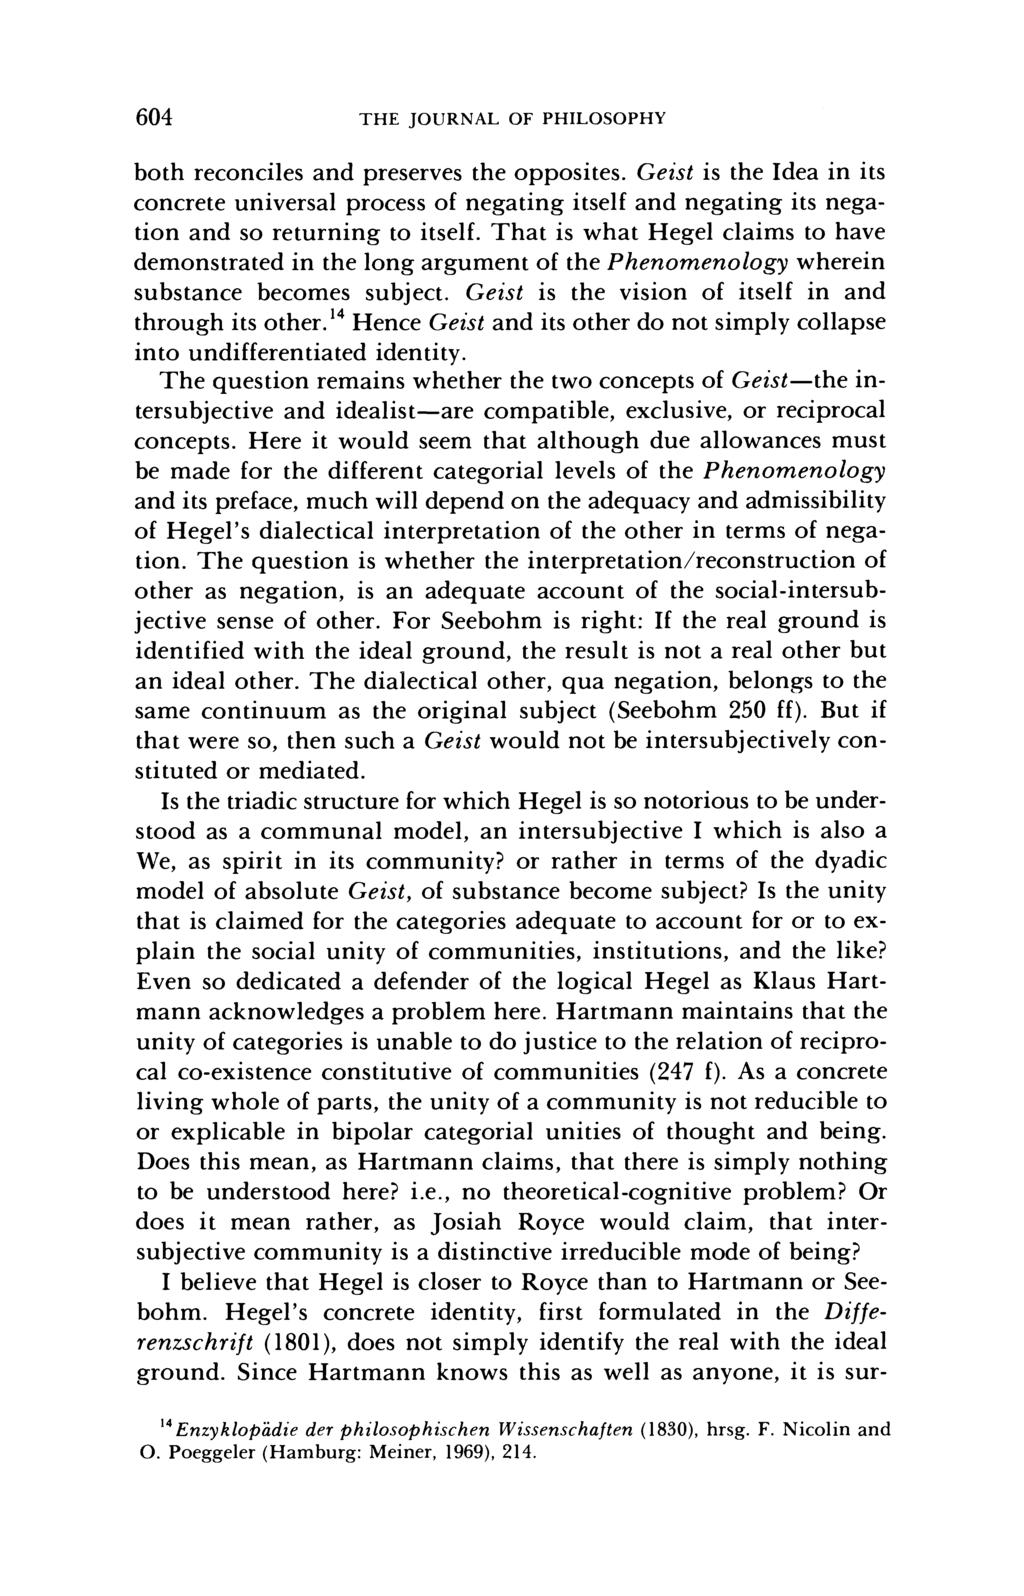 604 THE JOURNAL OF PHILOSOPHY both reconciles and preserves the opposites. Geist is the Idea in its concrete universal process of negating itself and negating its negation and so returning to itself.